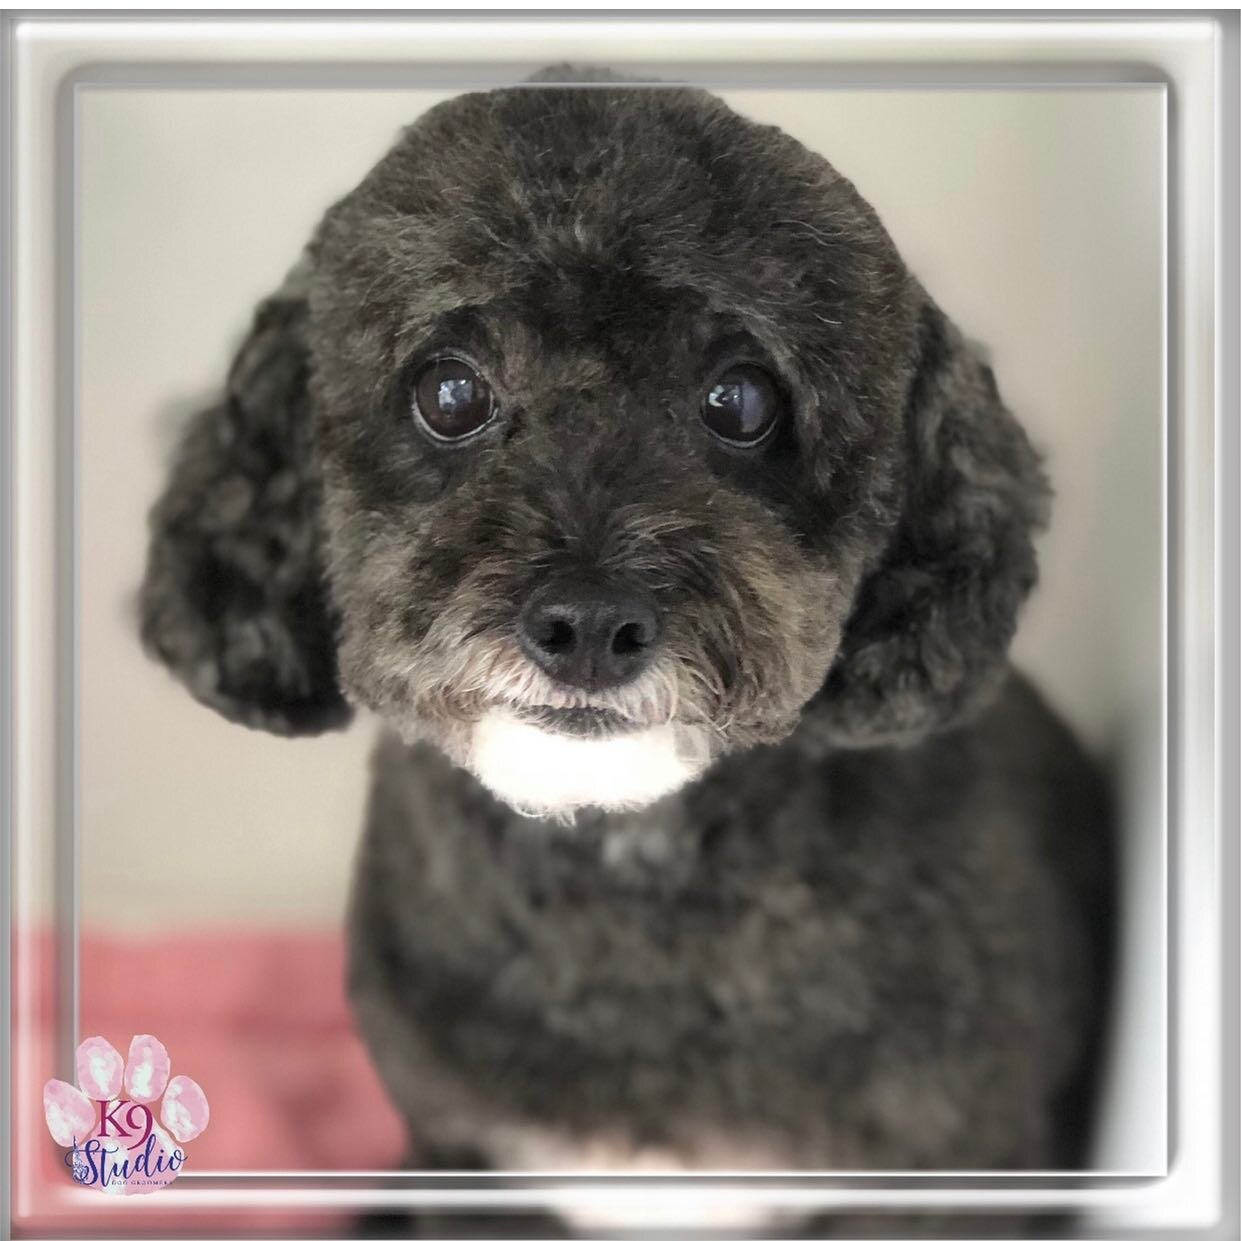 My clean puppy face for the summer&hearts;️
.
.
.
.
.
.
#summerhaircut #puppycut #puppylife #puppyoftheday #groomer #groomerlife #lavish #petsofinstagram #petstagram #greenwichct #grooming #doggrooming #doggroominglife #scissors #minipoodle #minipood